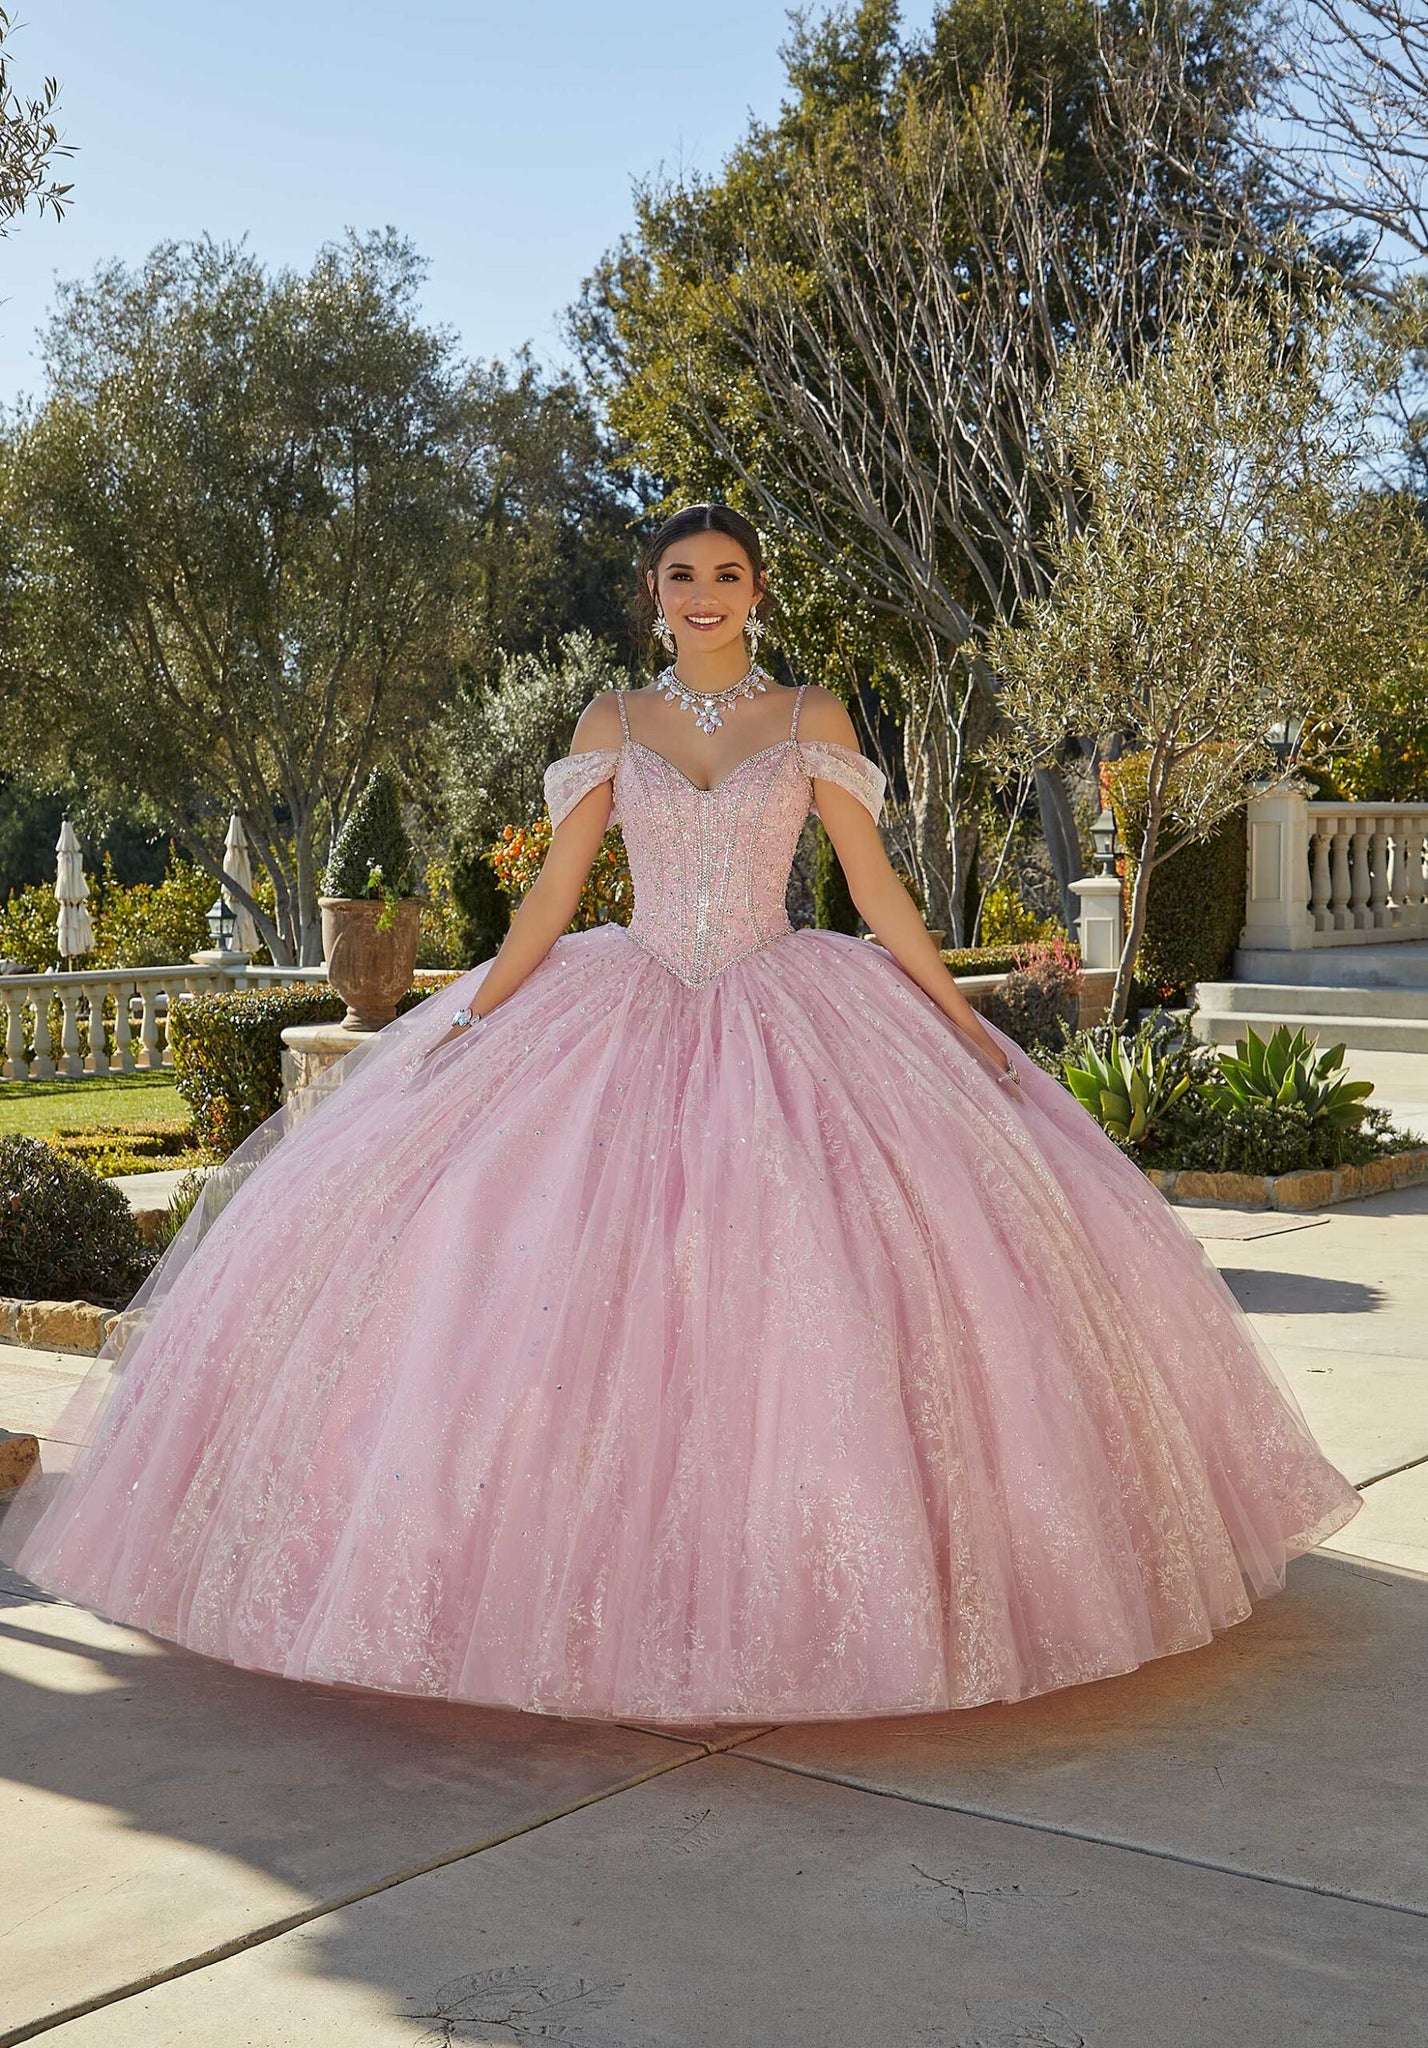 Patterned Glitter Quinceañera Dress with Bow